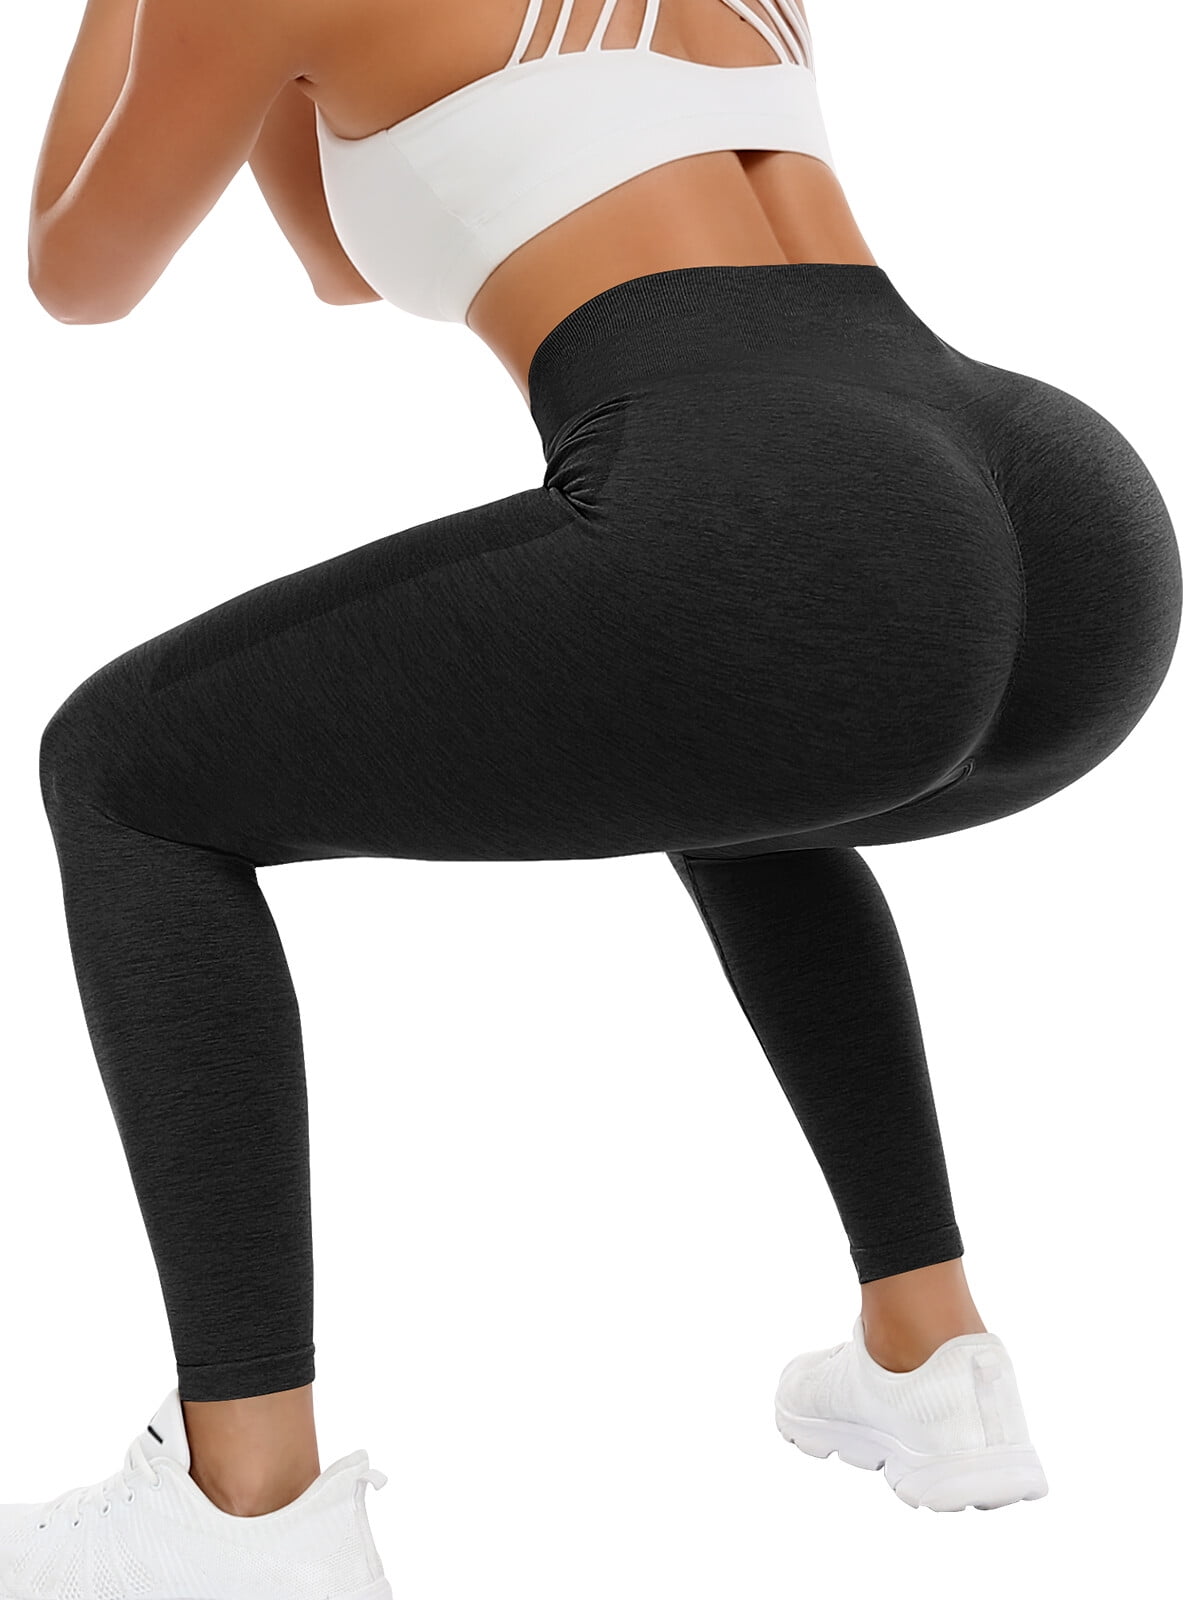 A AGROSTE Seamless Butt Lifting Leggings for Women Booty High Waisted  Workout Yoga Pants Scrunch Gym Leggings Violet-S 